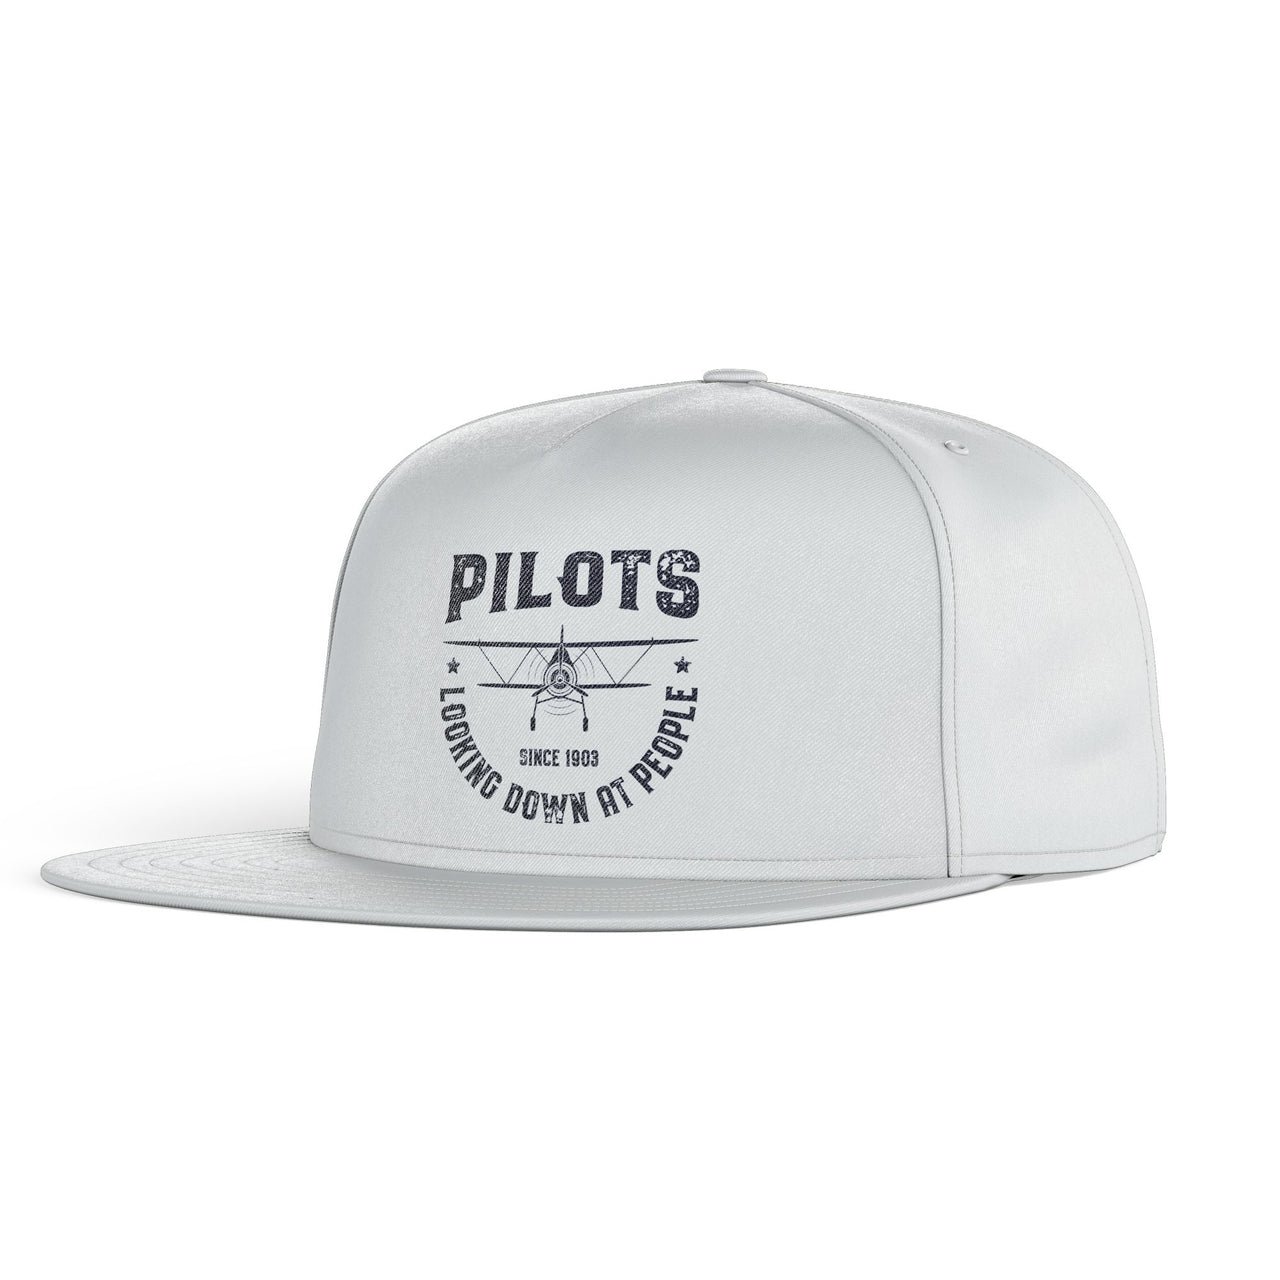 Pilots Looking Down at People Since 1903 Designed Snapback Caps & Hats